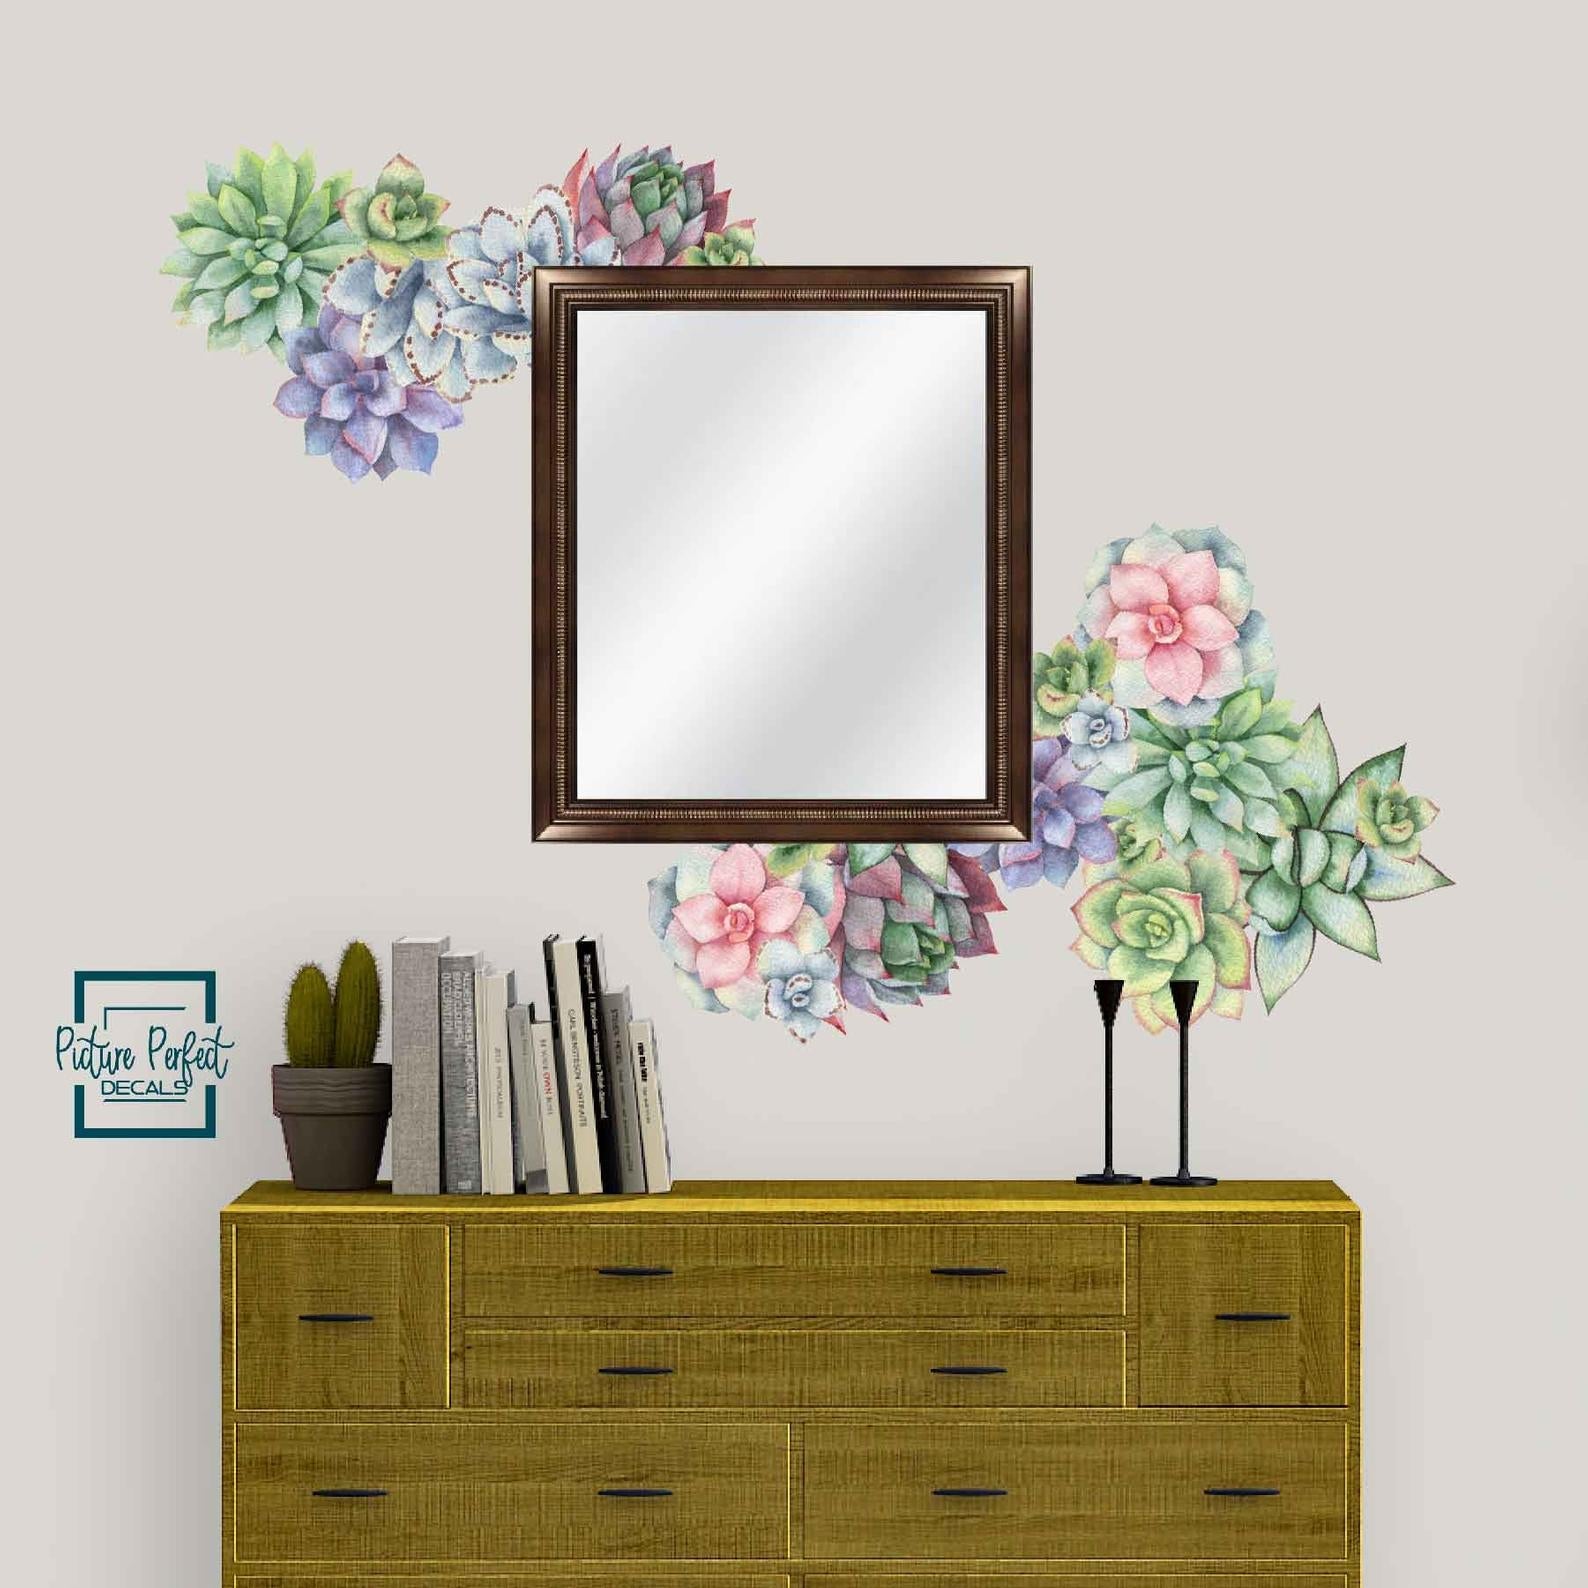 Succulents Wall Decals | Succulent Bouquet Wall Stickers - Picture Perfect Decals